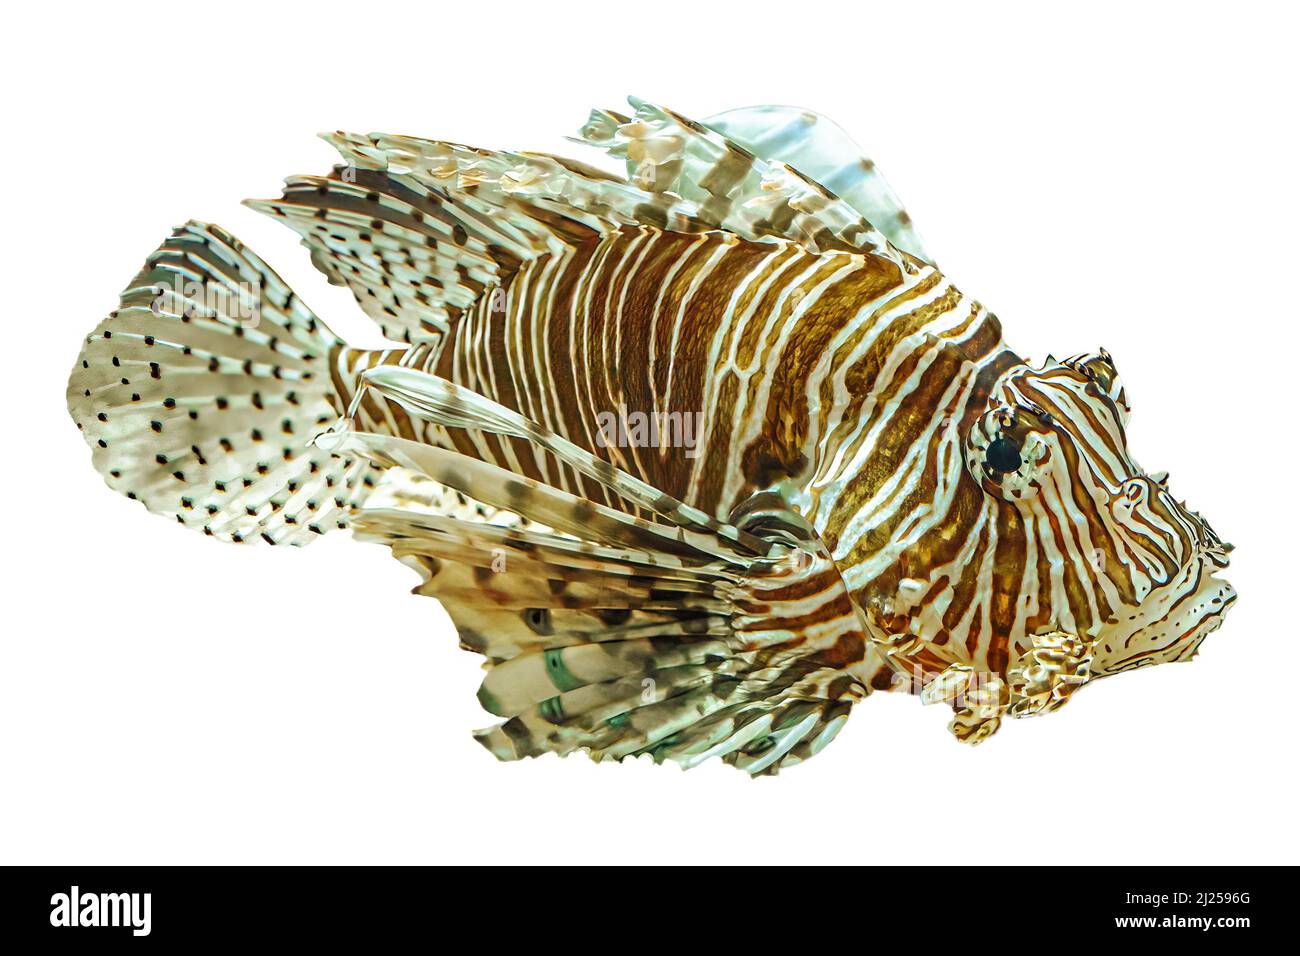 close up of a Lionfish of aquarium with venomous fins in coral depth isolated on white background. venomous predator fish of Pterois miles species Stock Photo